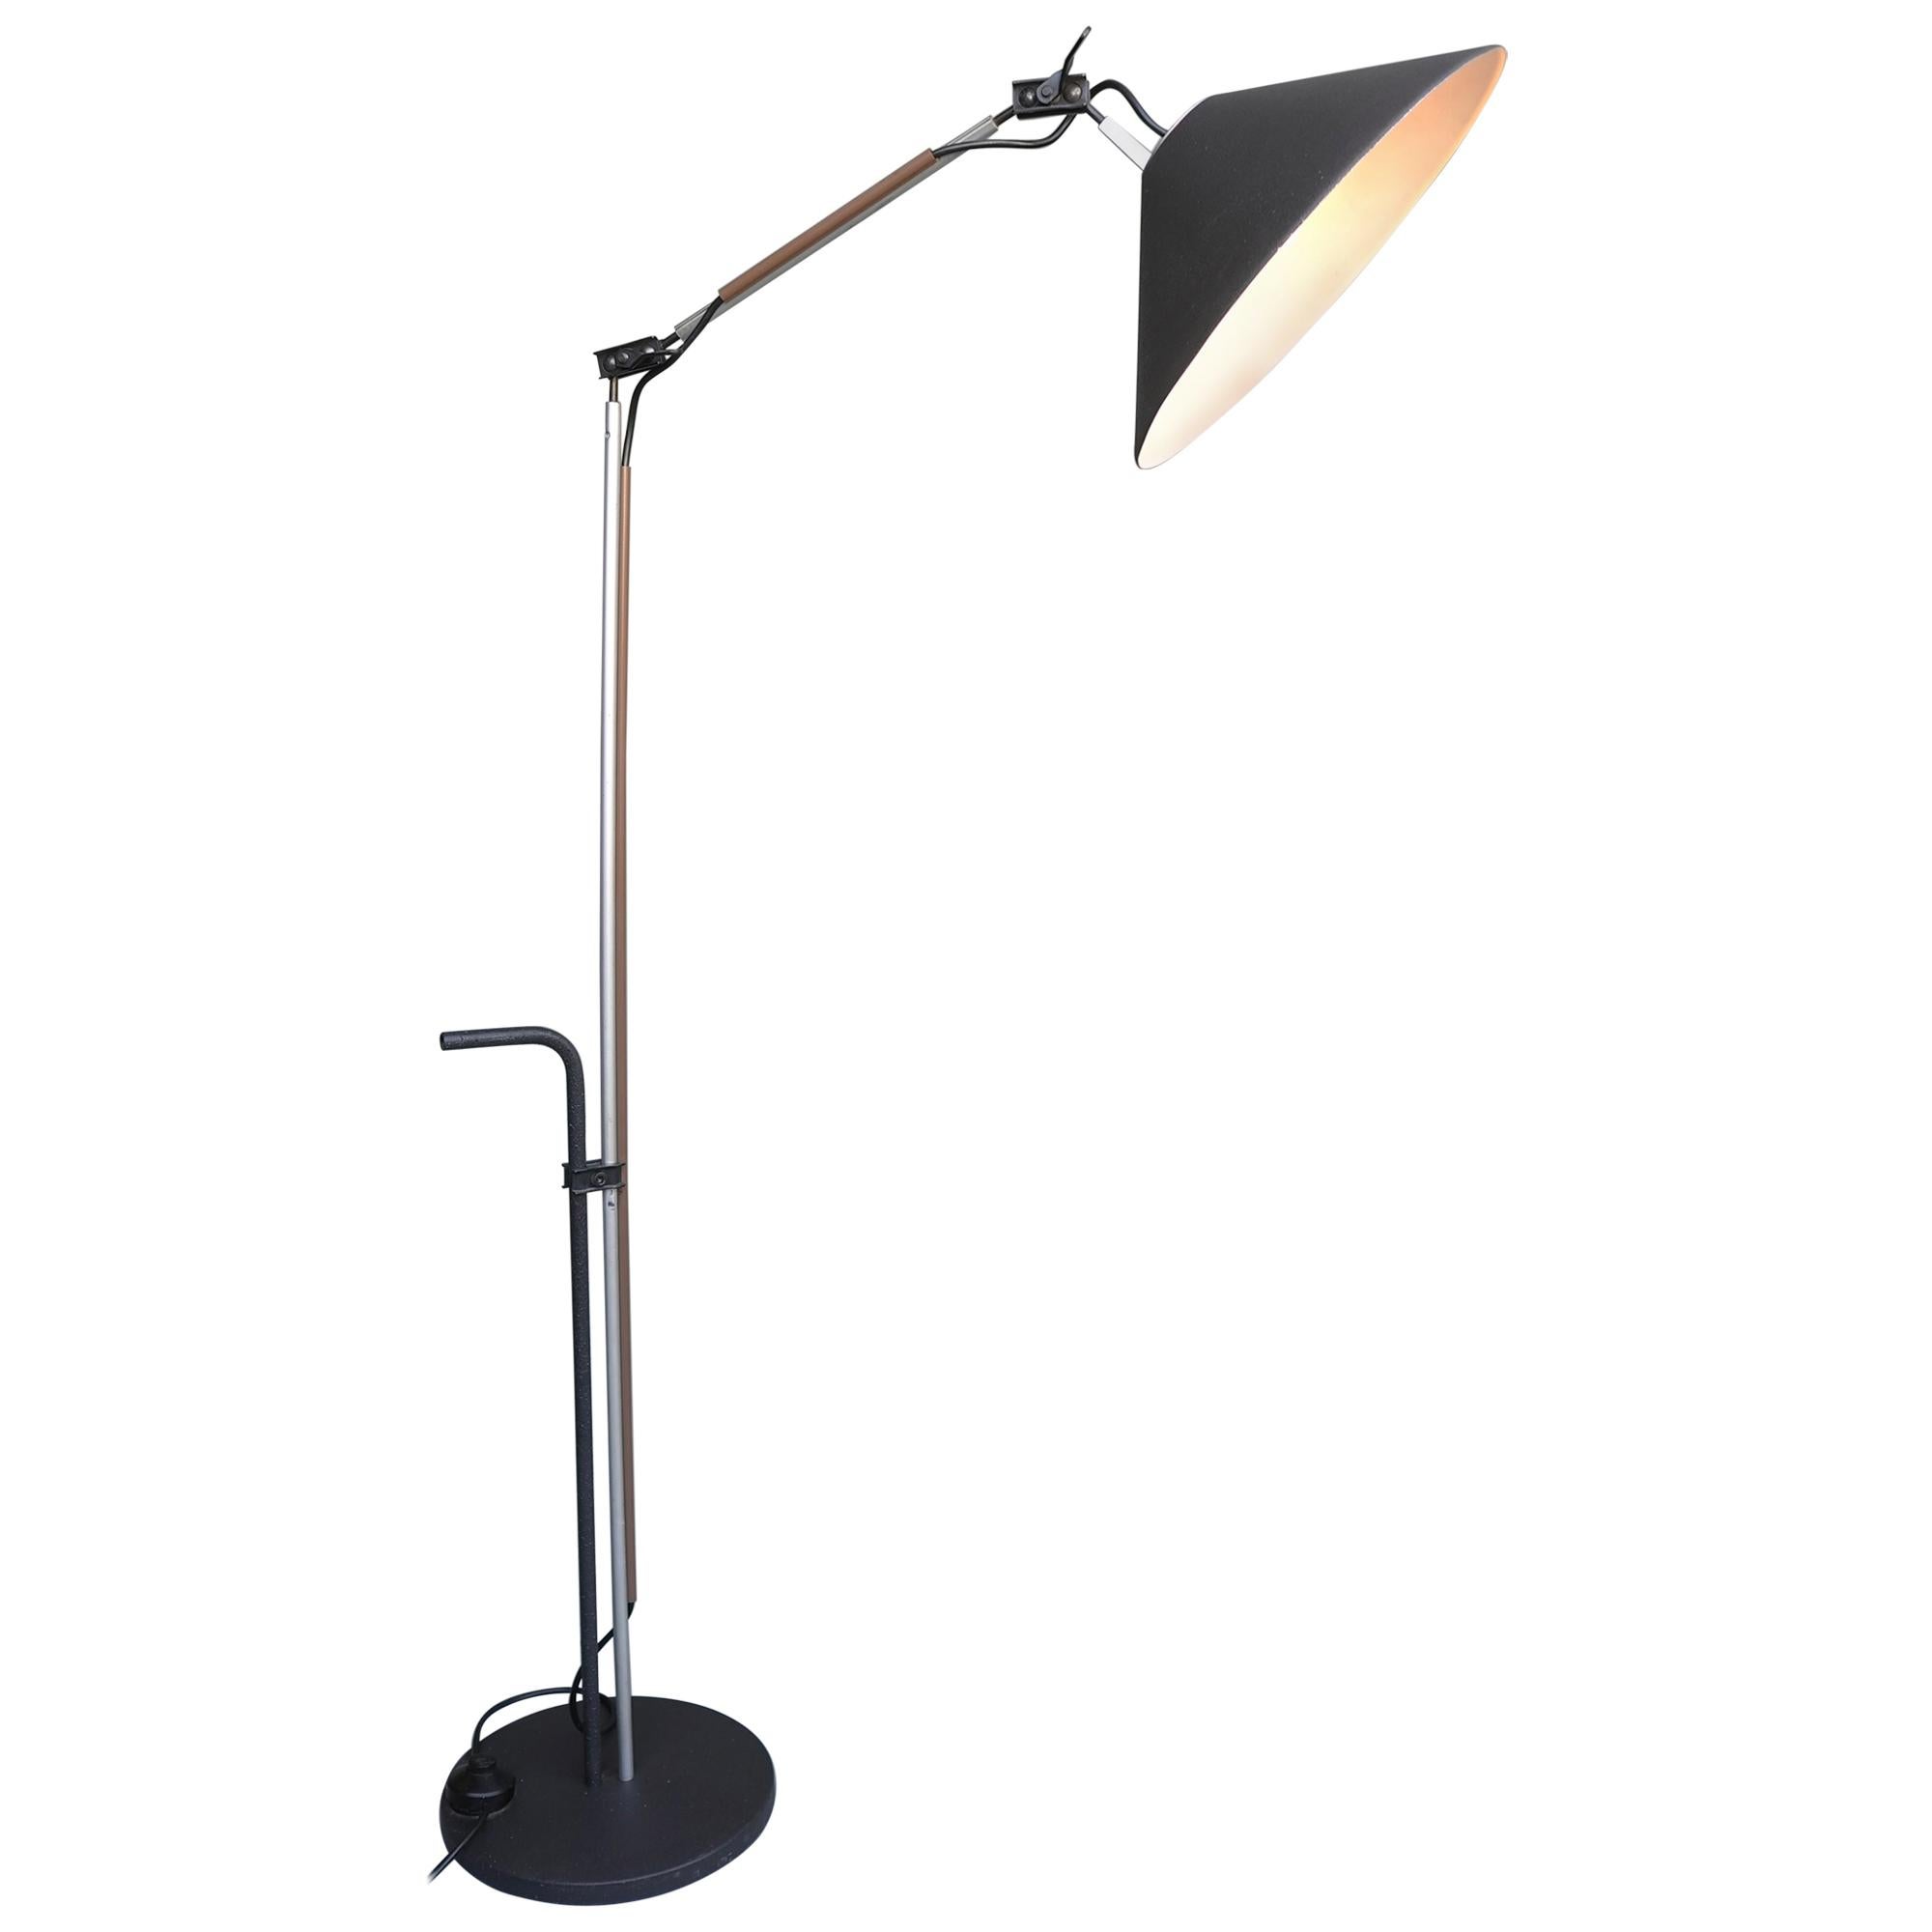 Enzo Mari Adjustable Floor Lamp "Aggregato" with Anthracite Shade, Italy, 1970s